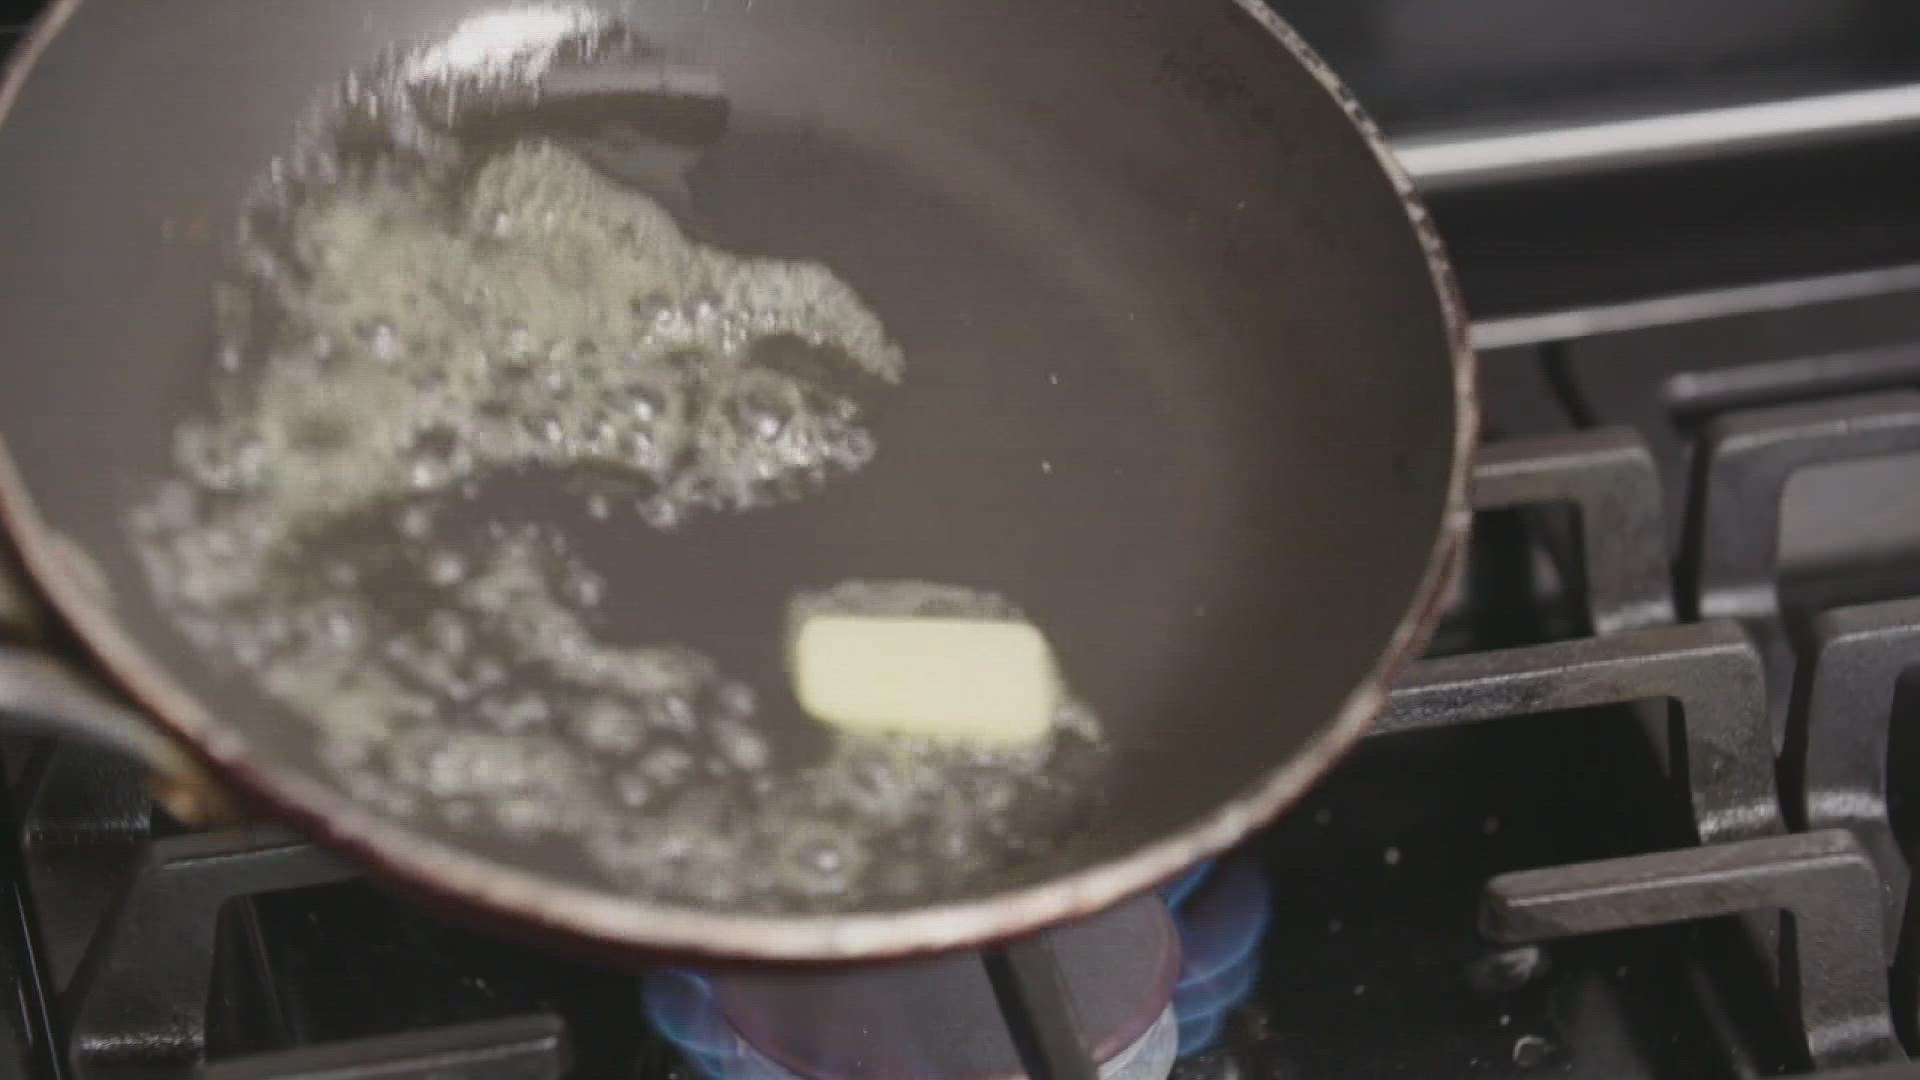 Consumer Reports tests pans for PFAS and other chemicals.